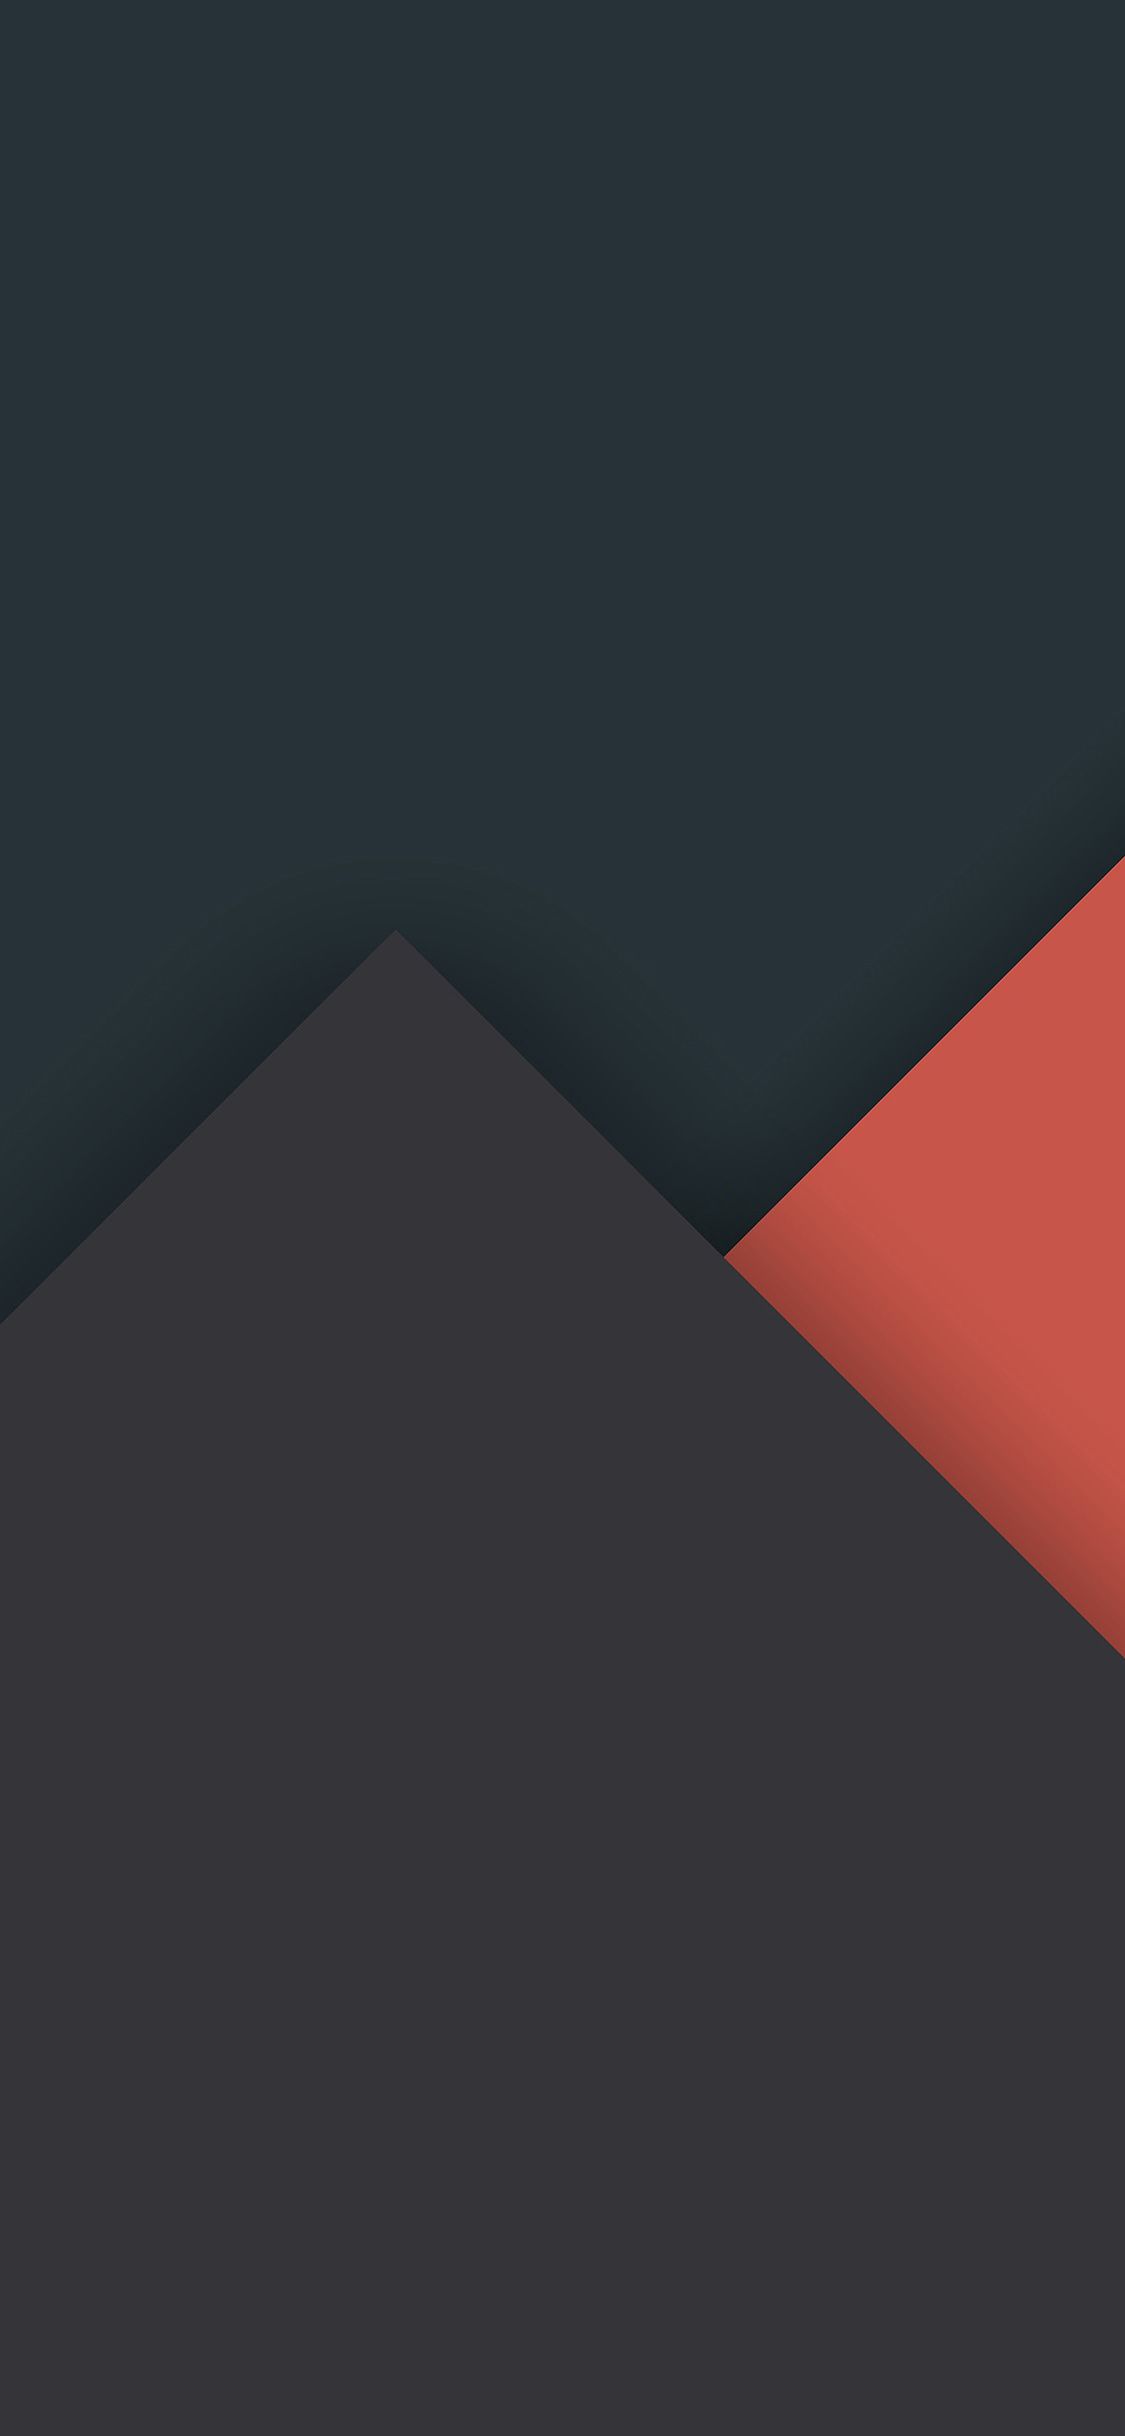 iPhone wallpaper. android lollipop material design pattern